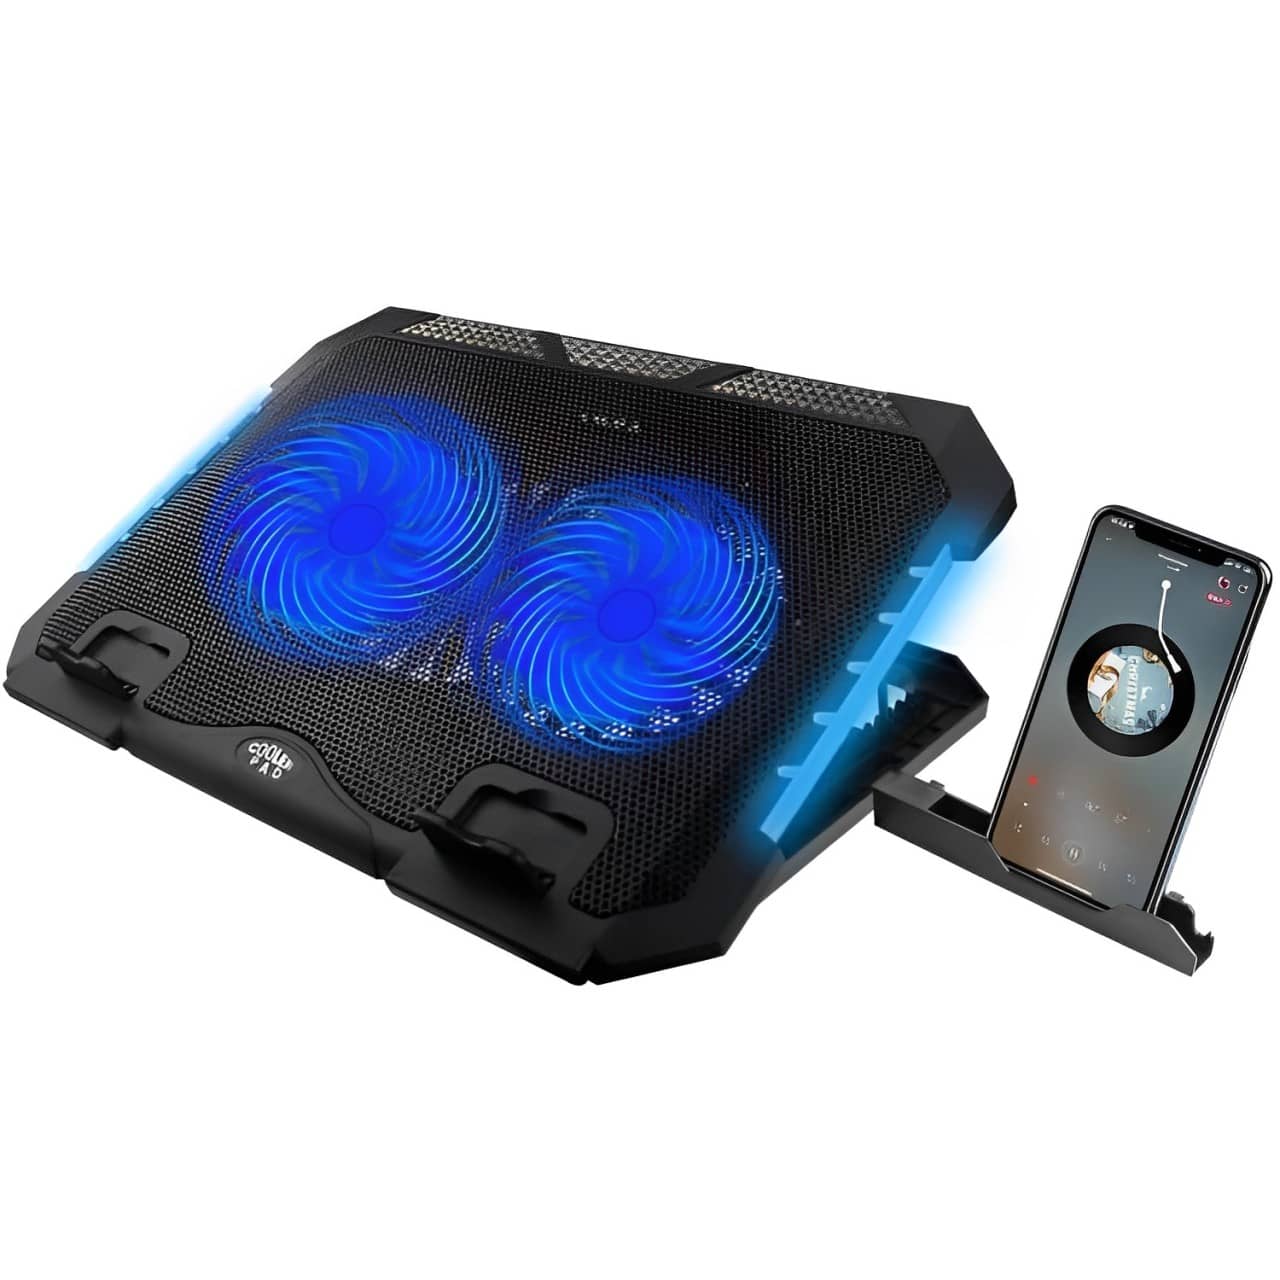 Adjustable Height RGB Laptop Cooling Pad Stand Dual USB GAMING S900 1 1